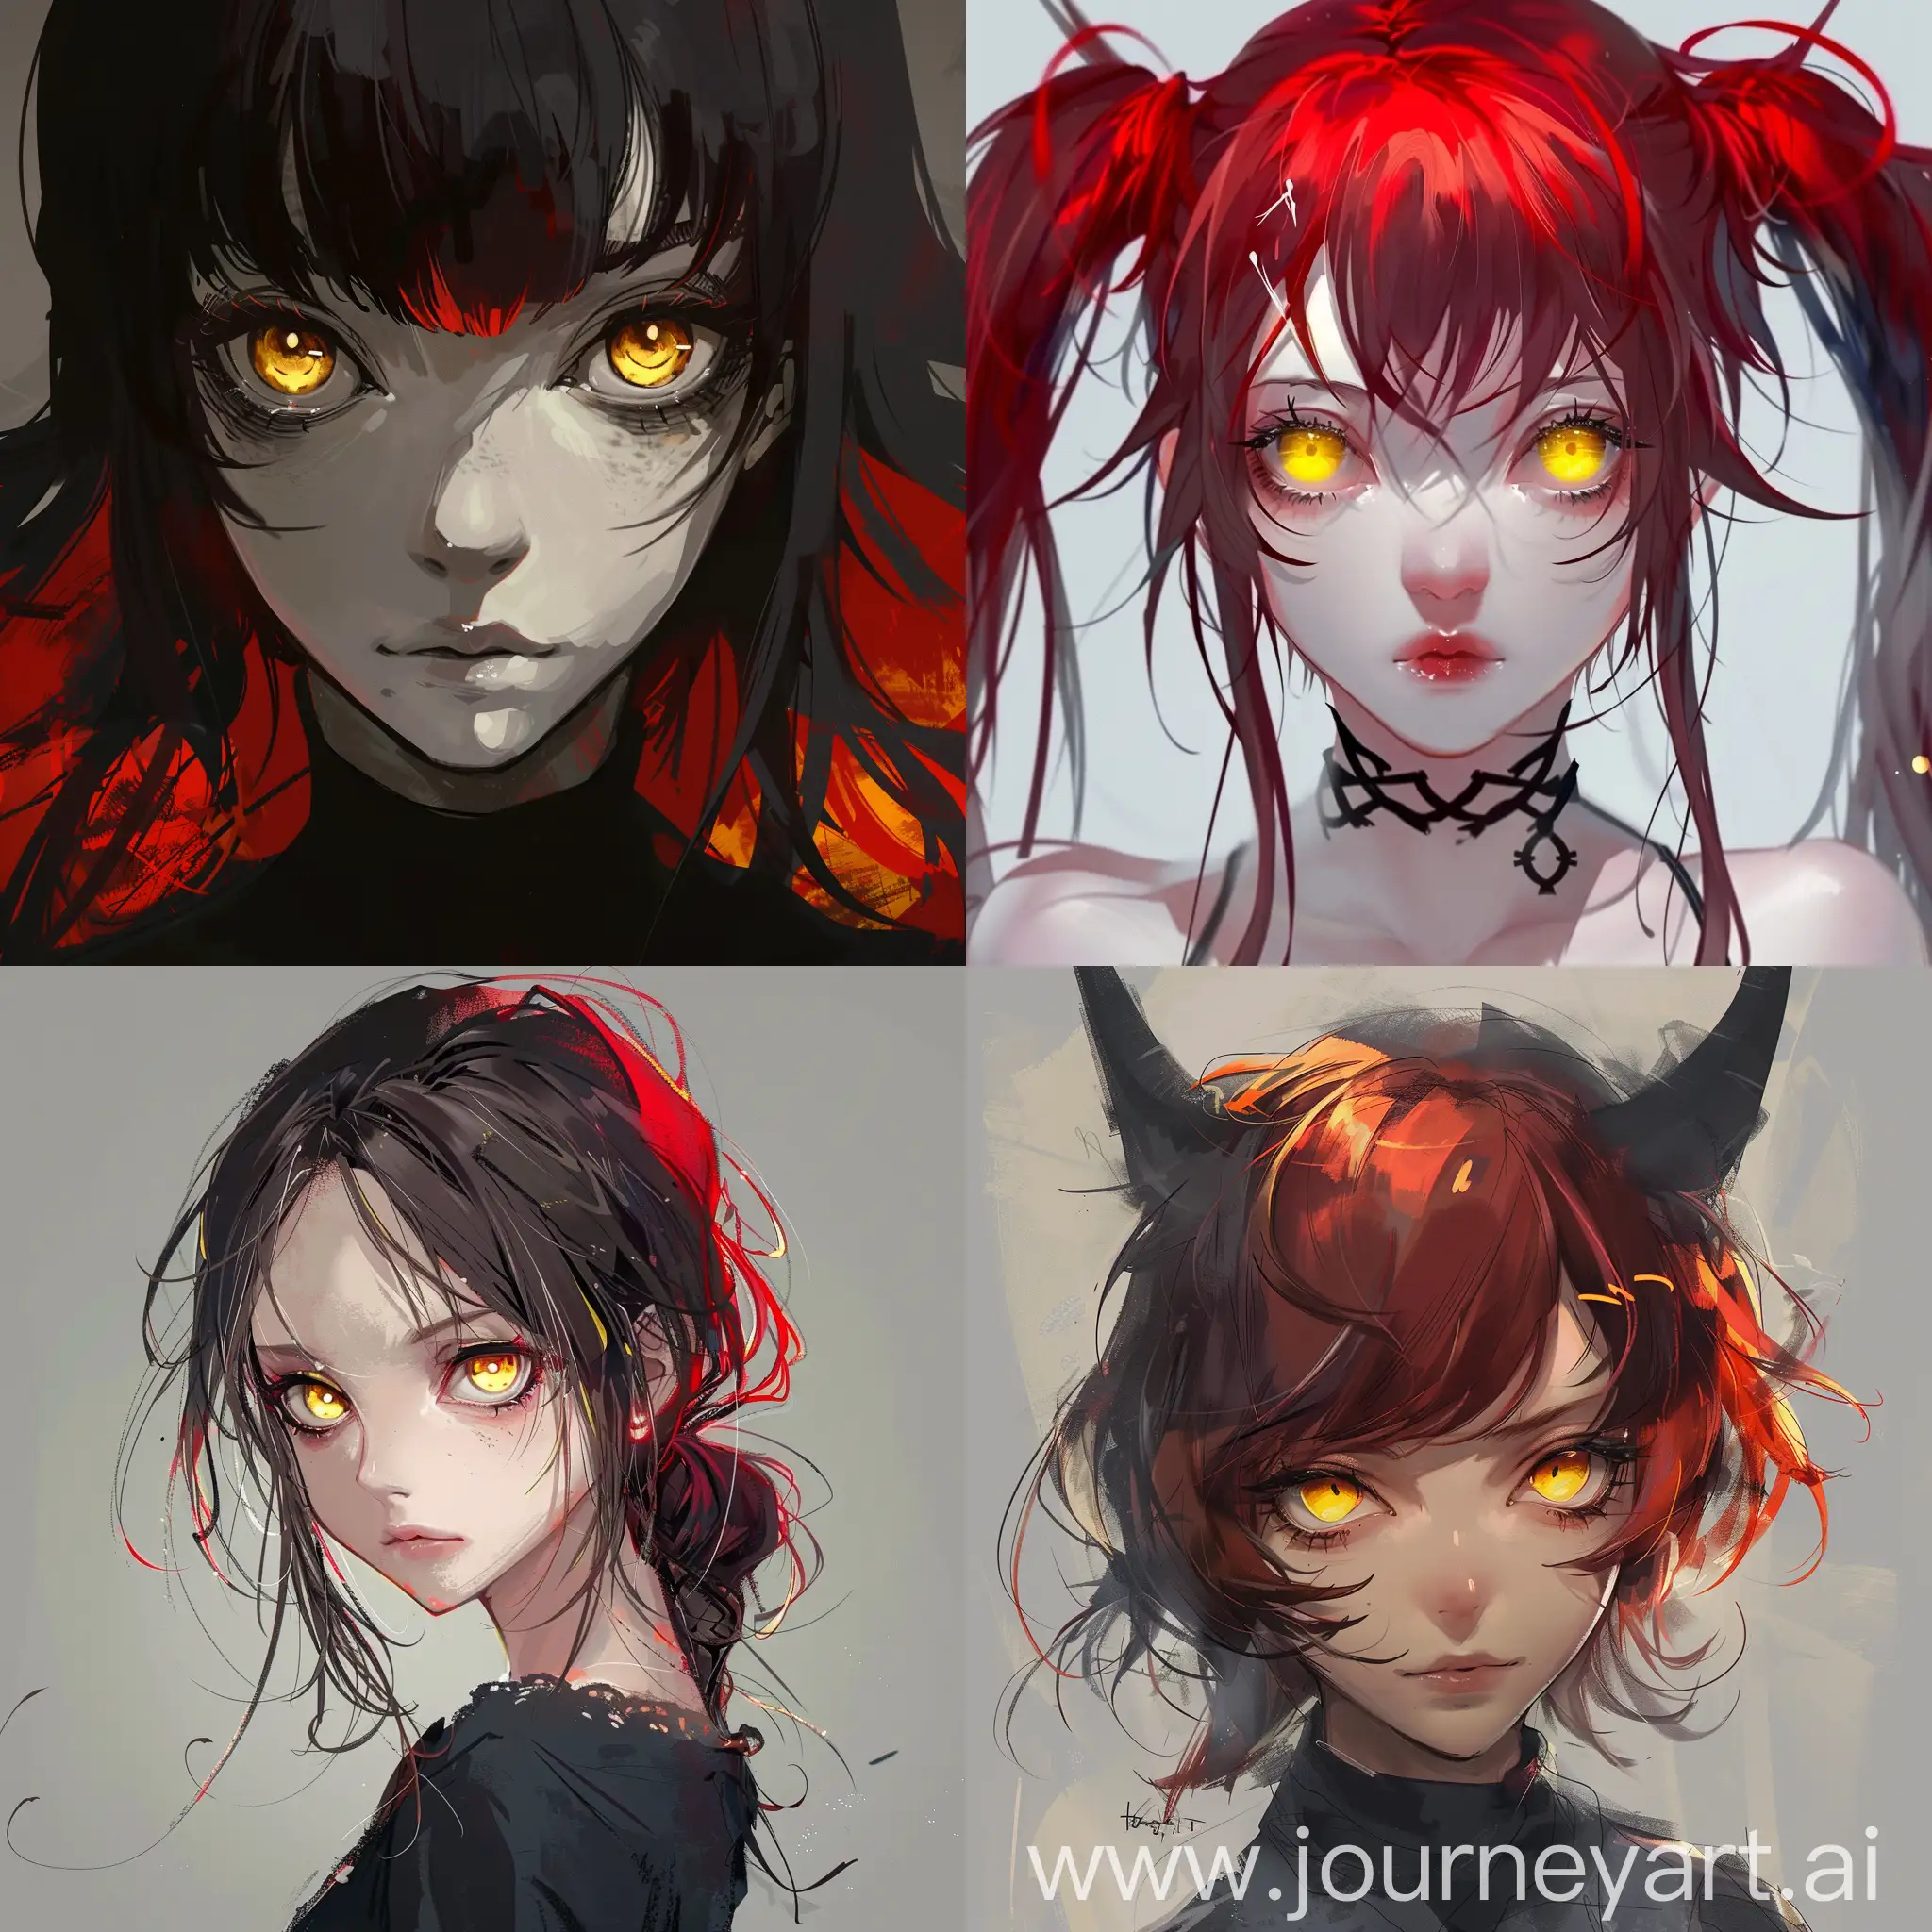 Concept art for anime character, girl, red hear, yellow eyes